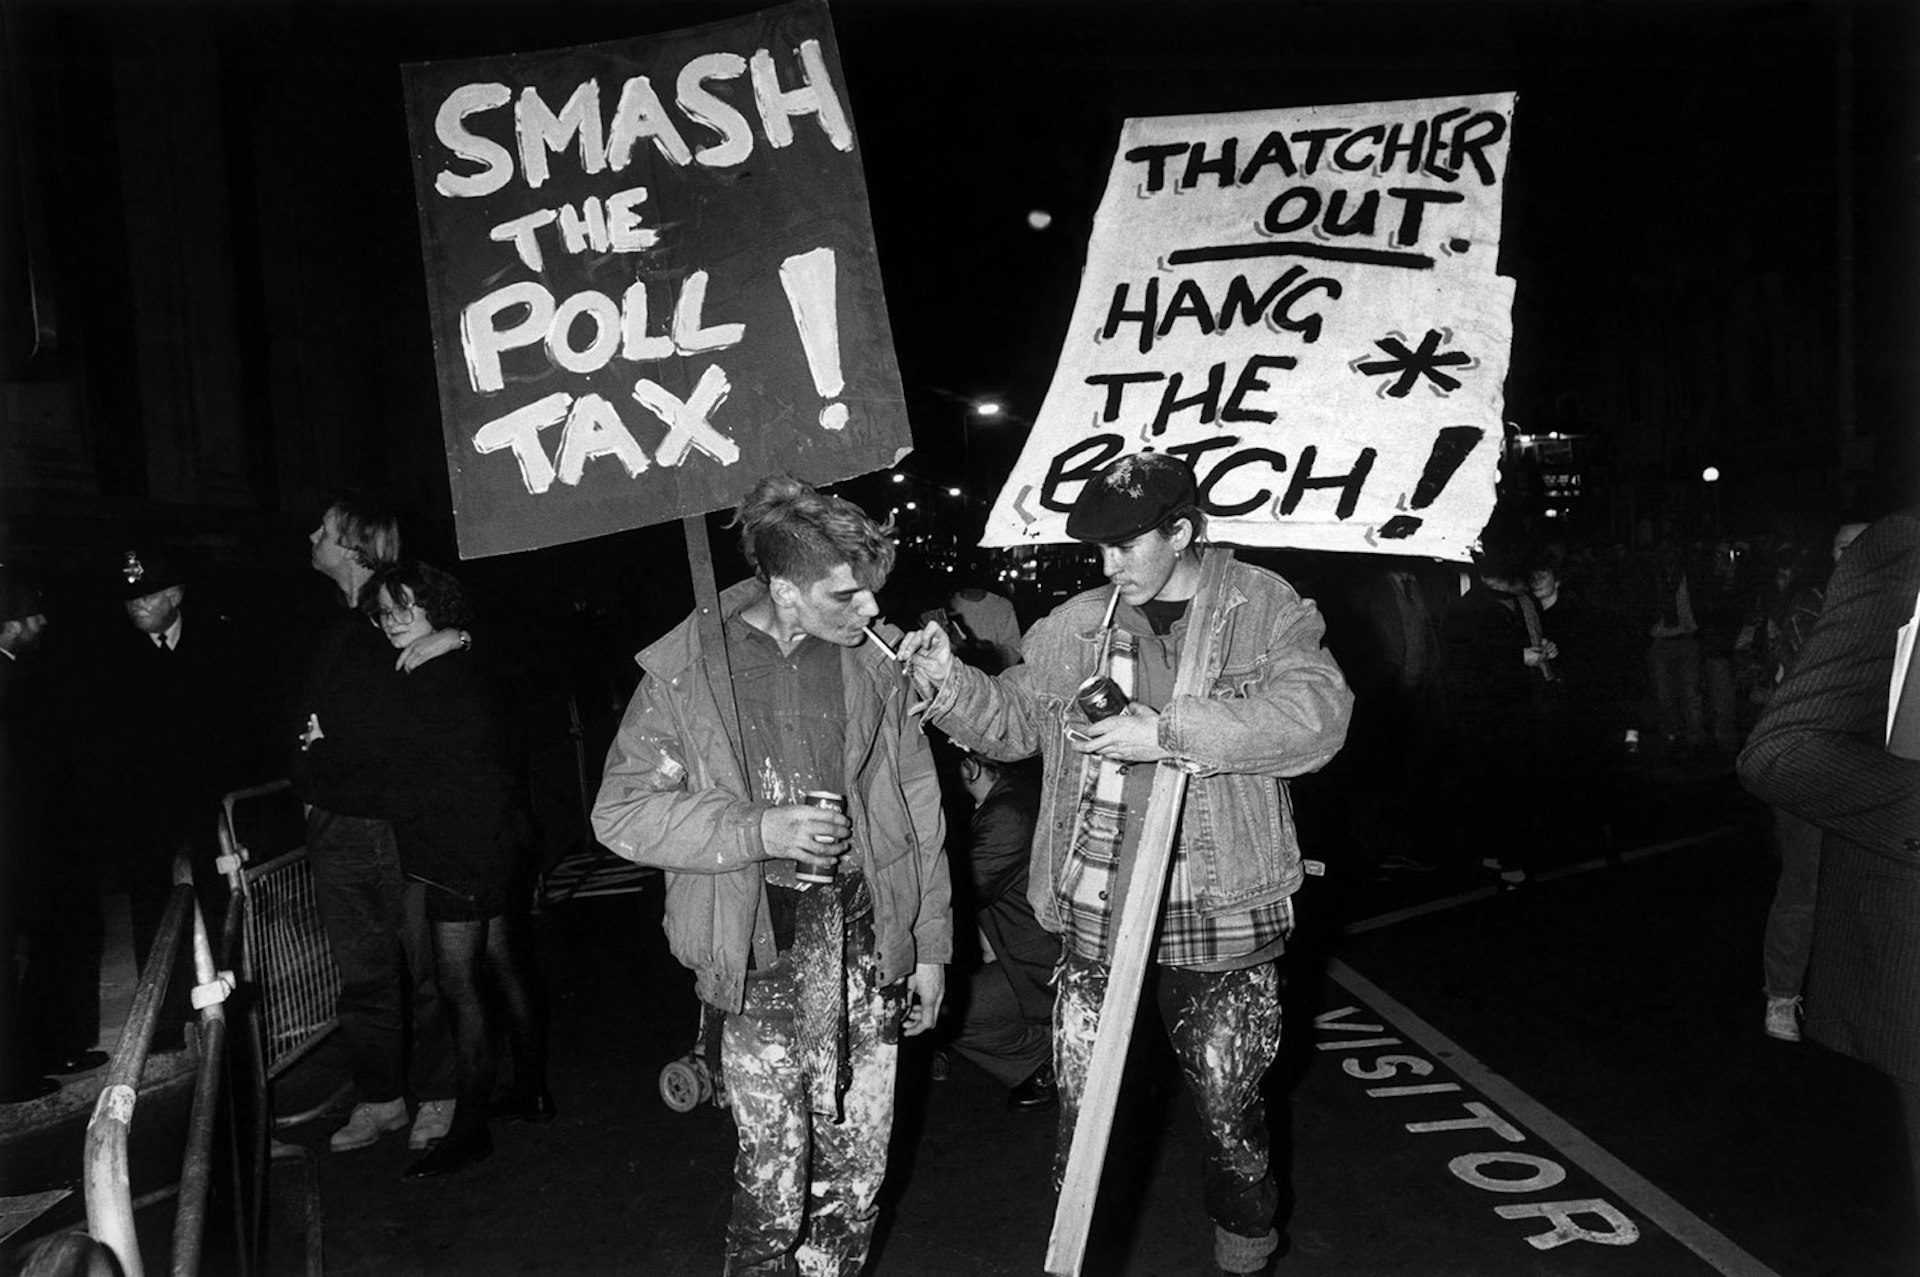 The history of the Poll Tax and the power of direct action